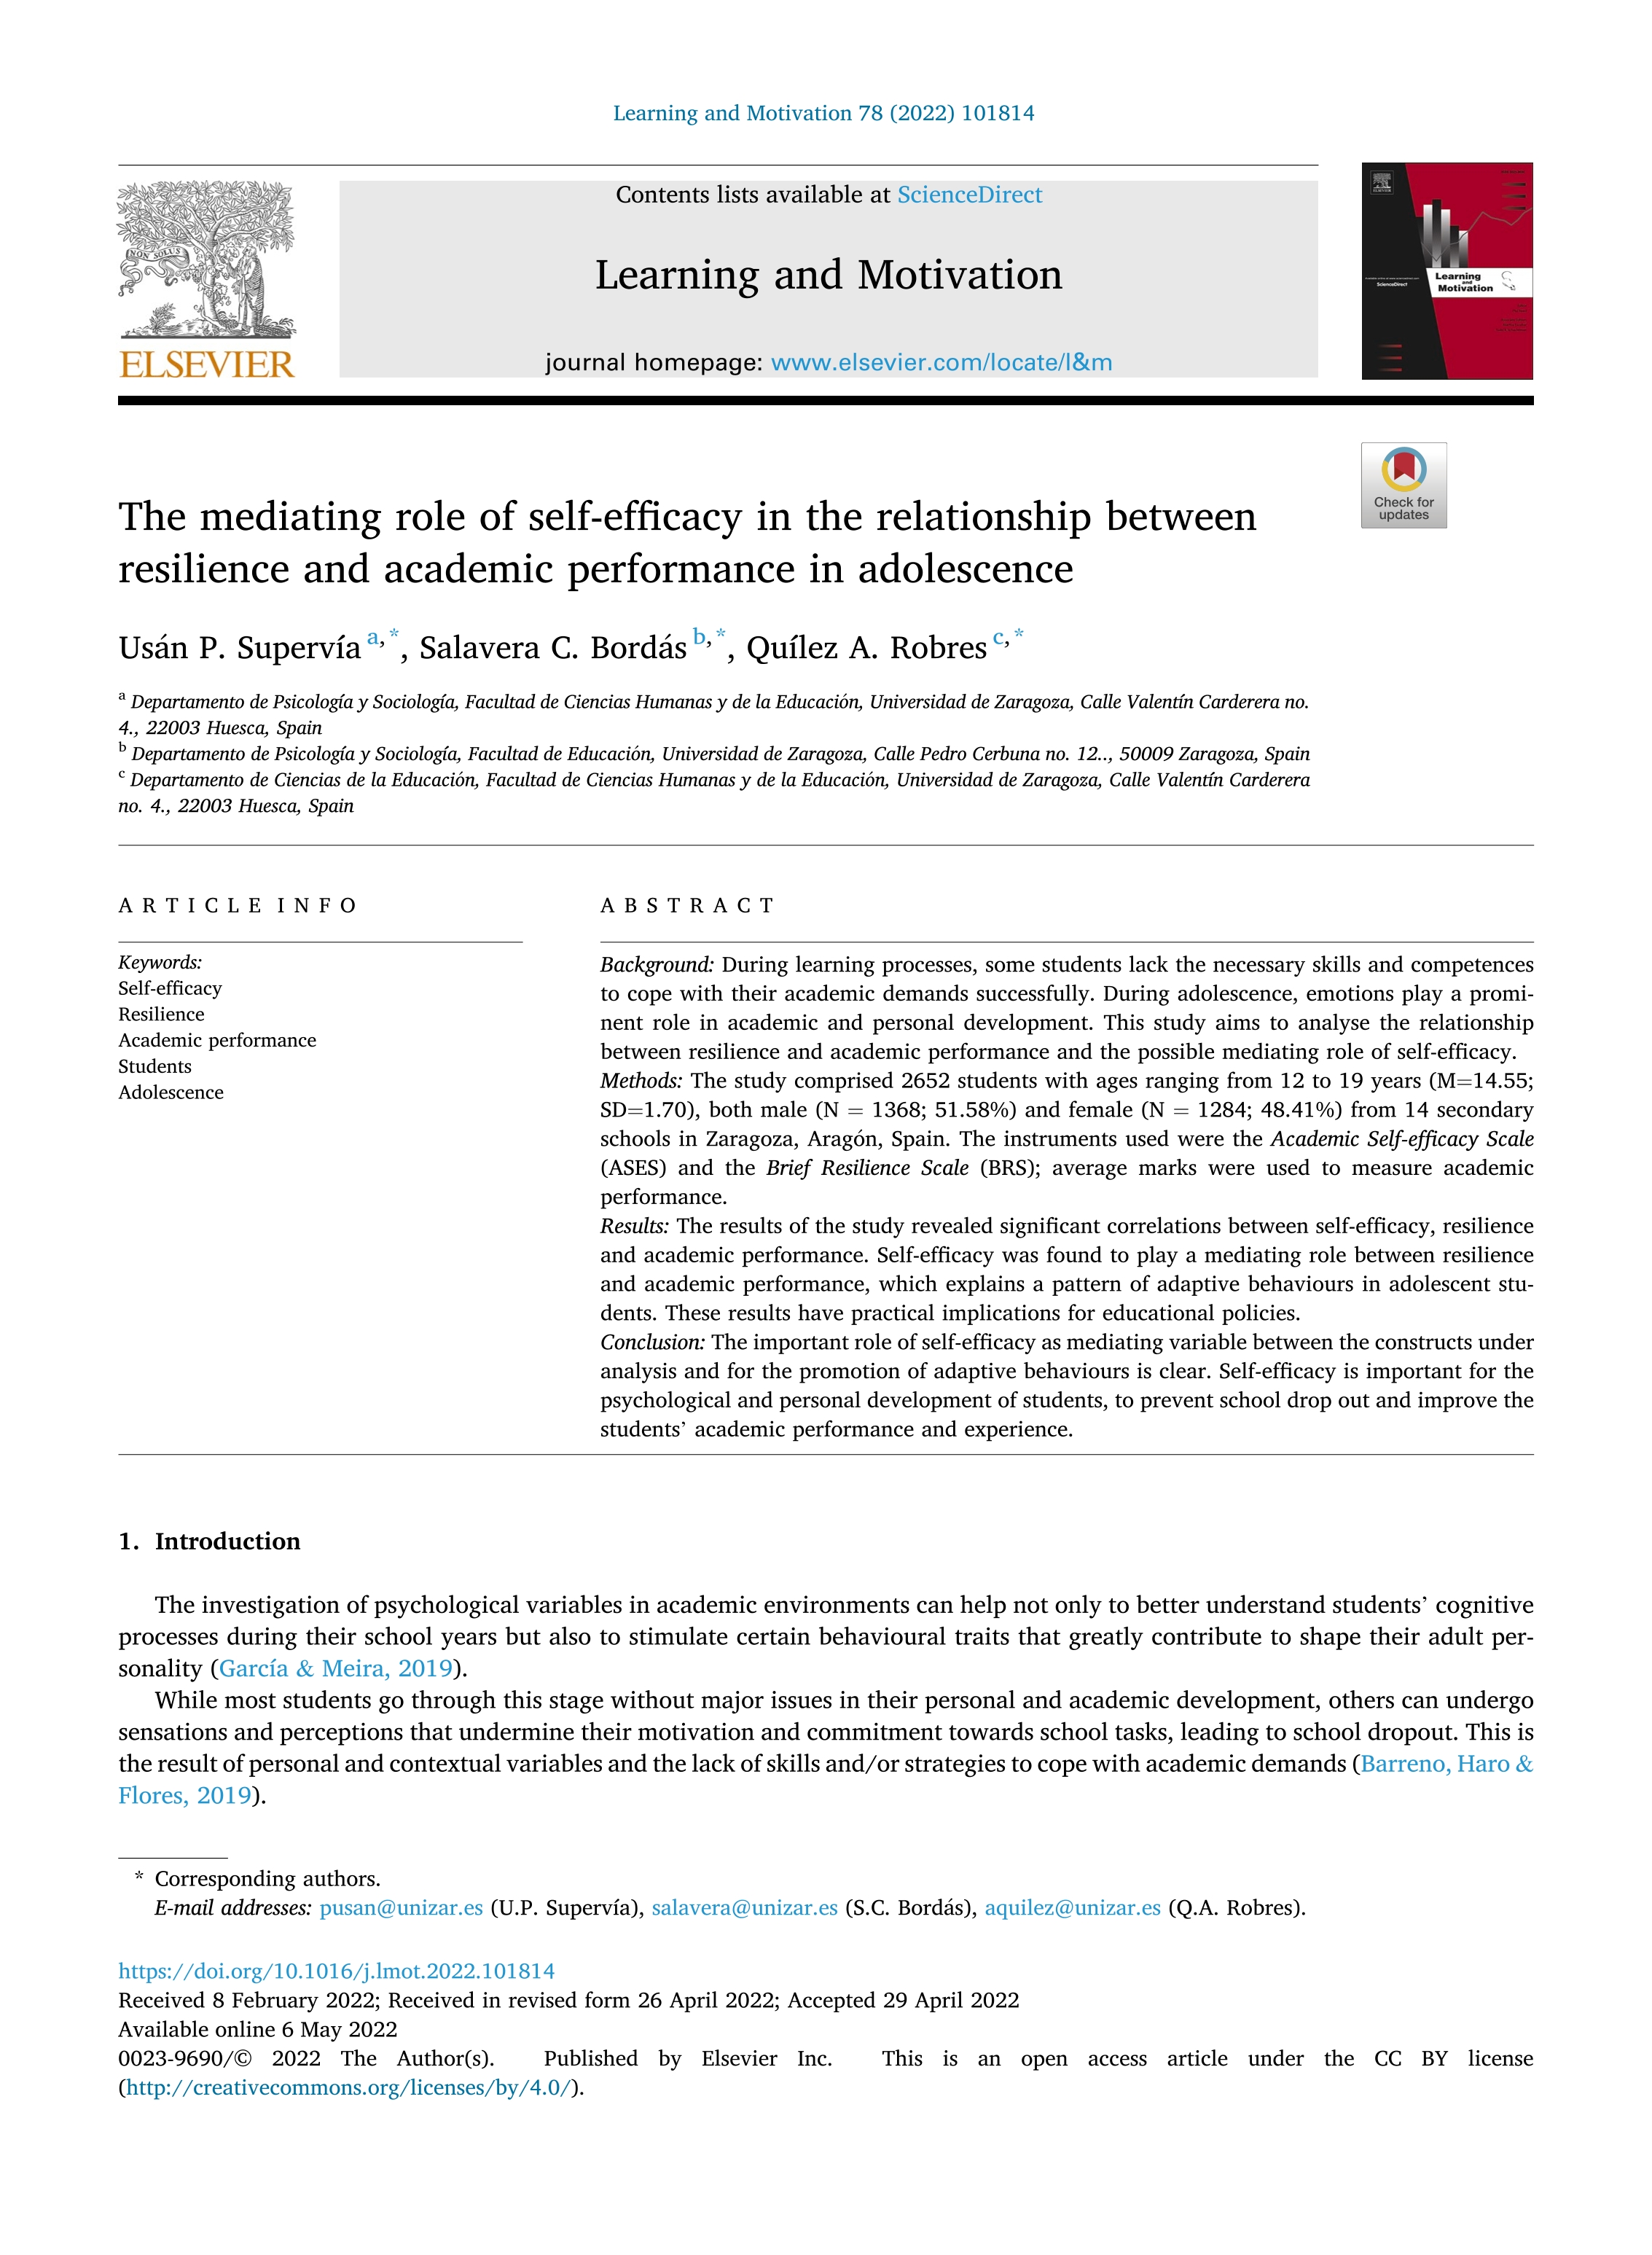 The mediating role of self-efficacy in the relationship between resilience and academic performance in adolescence